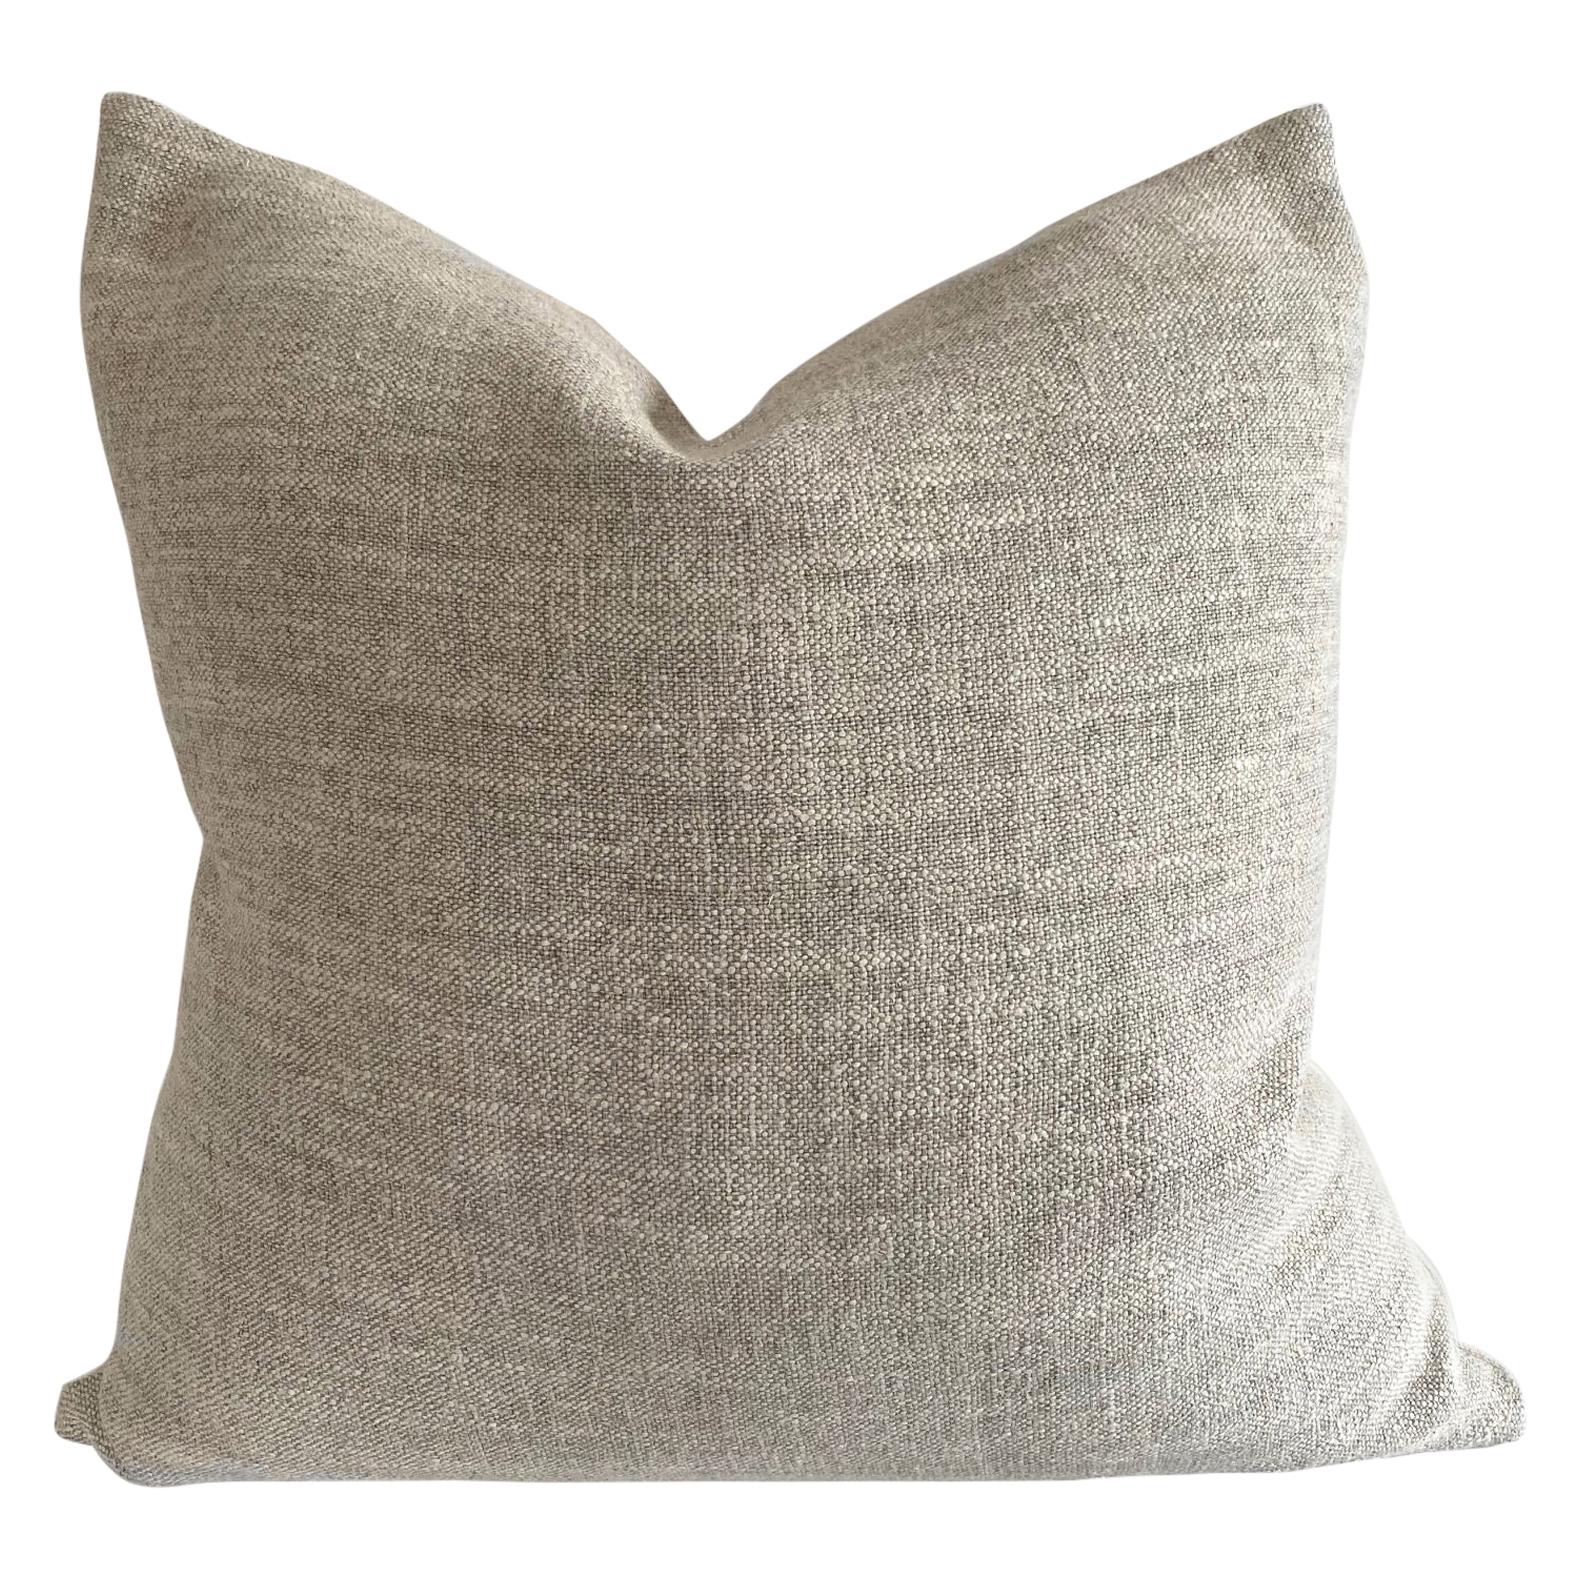 Custom Nubby Gray Linen Accent Pillow with Down Feather Insert For Sale